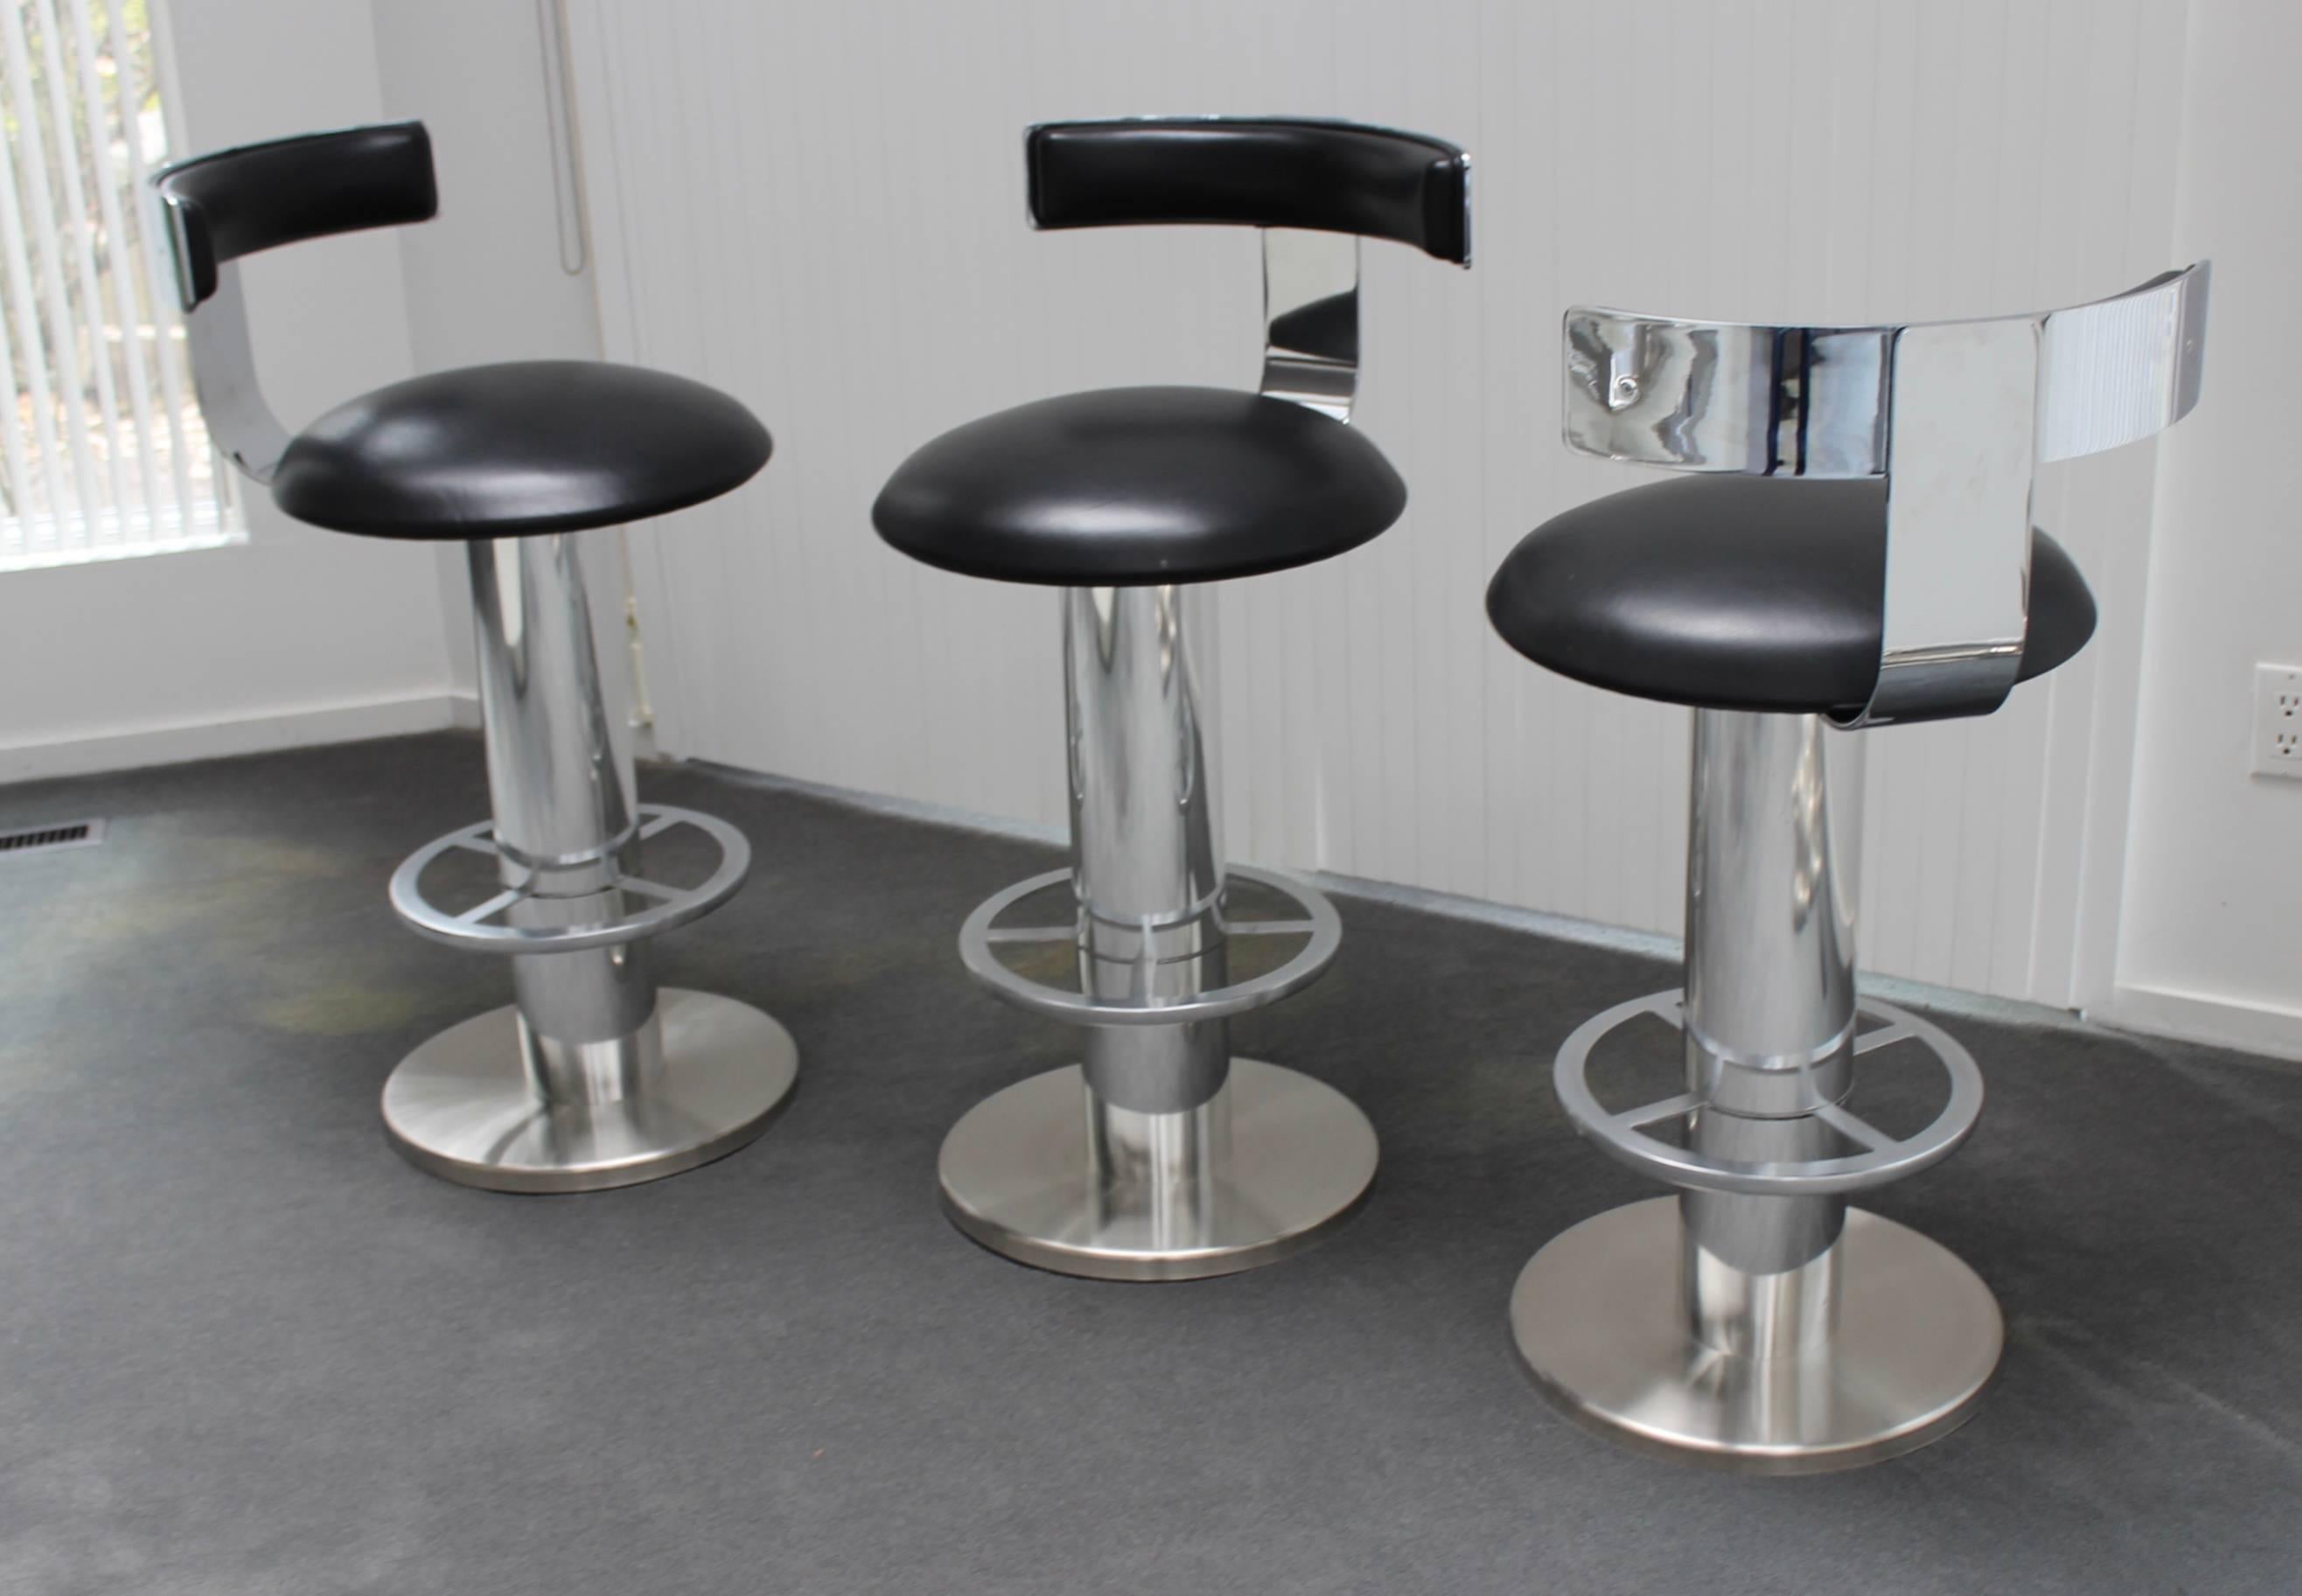 Steel Designs for Leisure Chrome and Leather Bar Stools